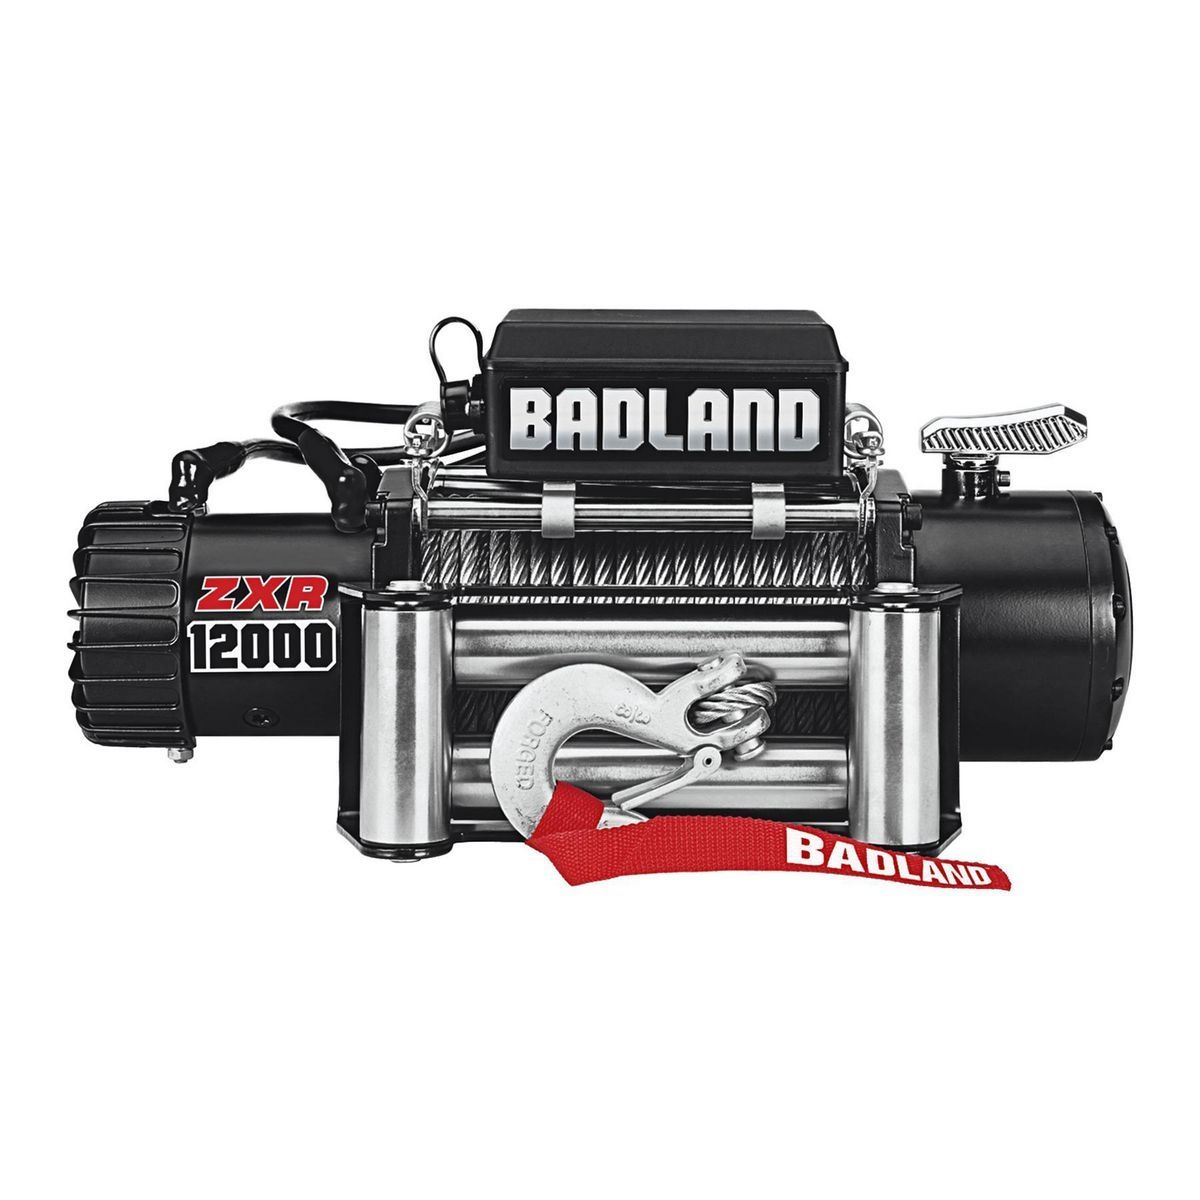 12,000 lb. Winch with Wire Rope on Sale At Harbor Freight Tools